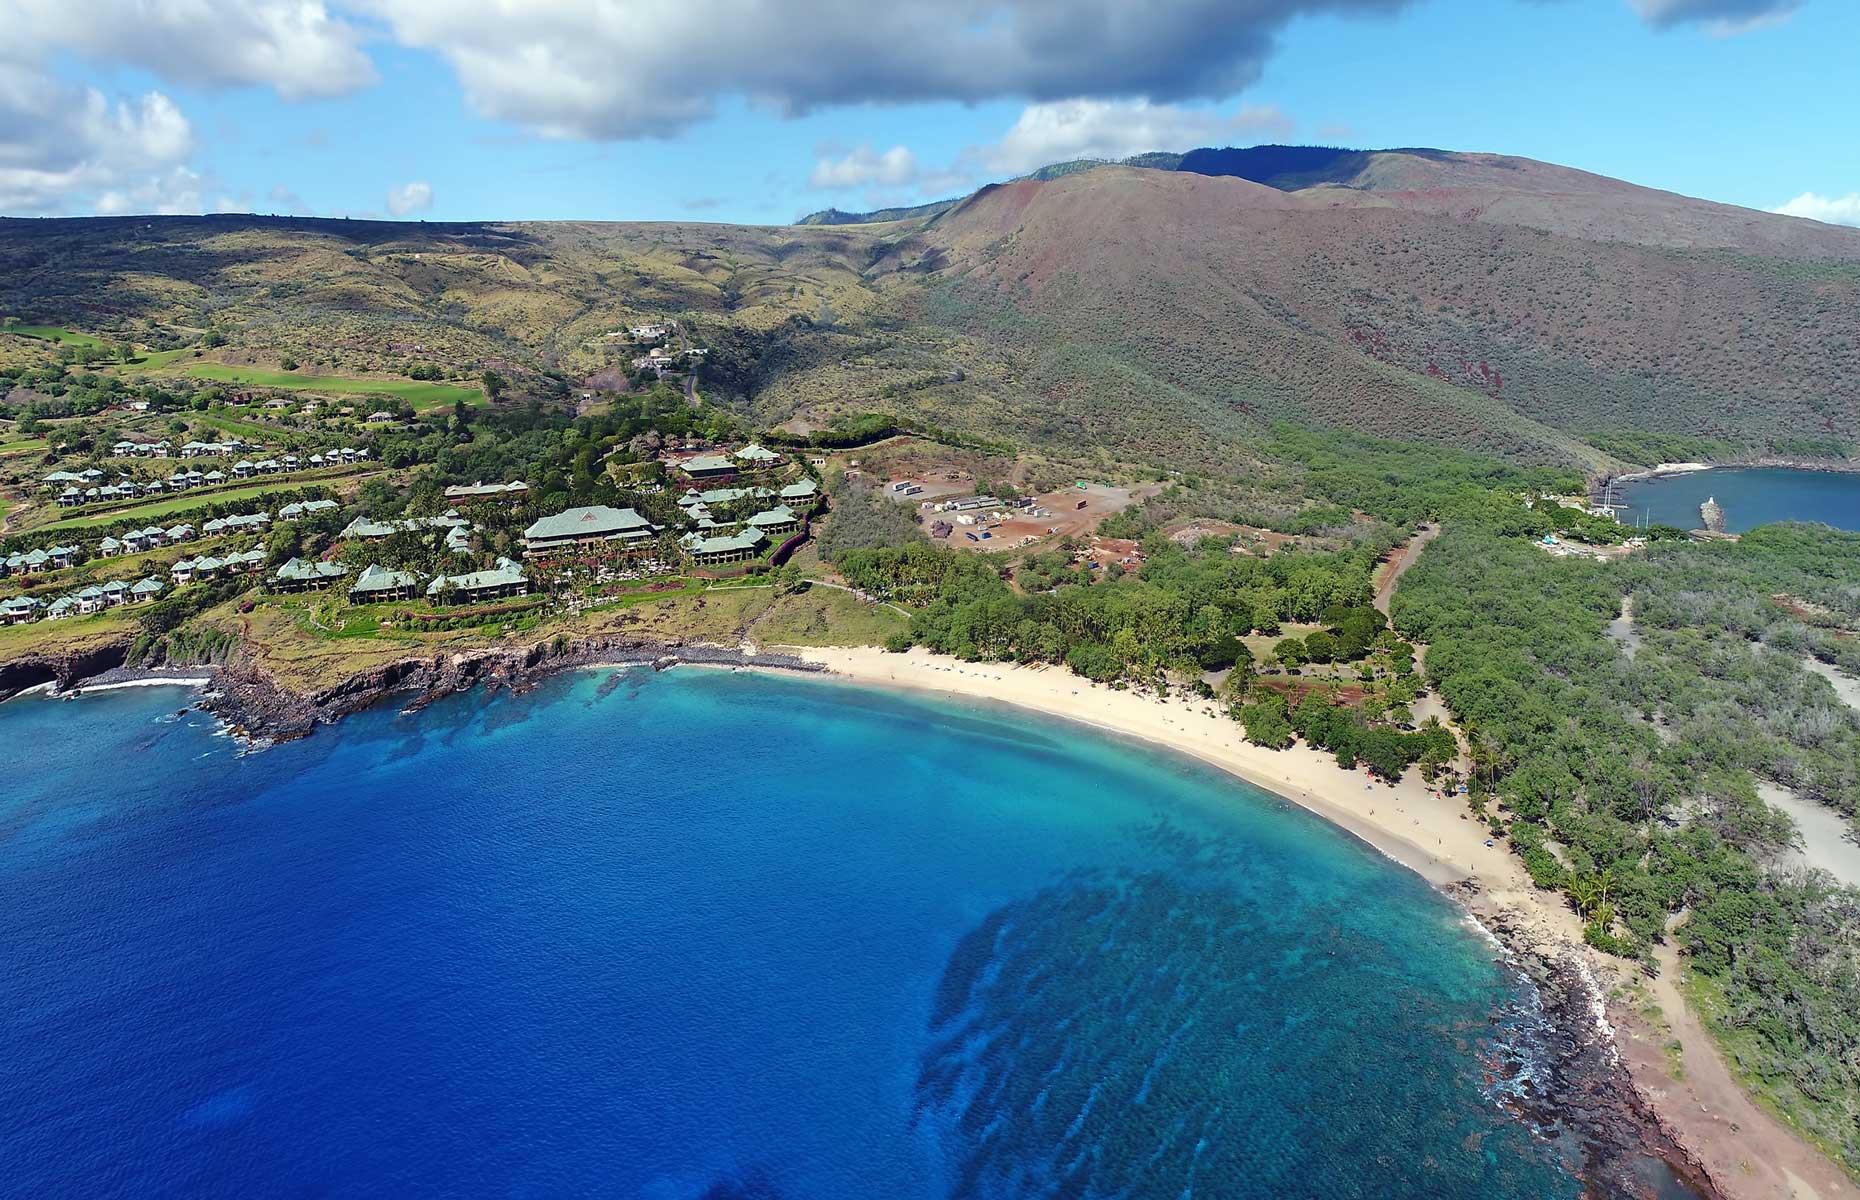 Ellison is now building a hydroponic farm of undisclosed size on his Hawaiian island